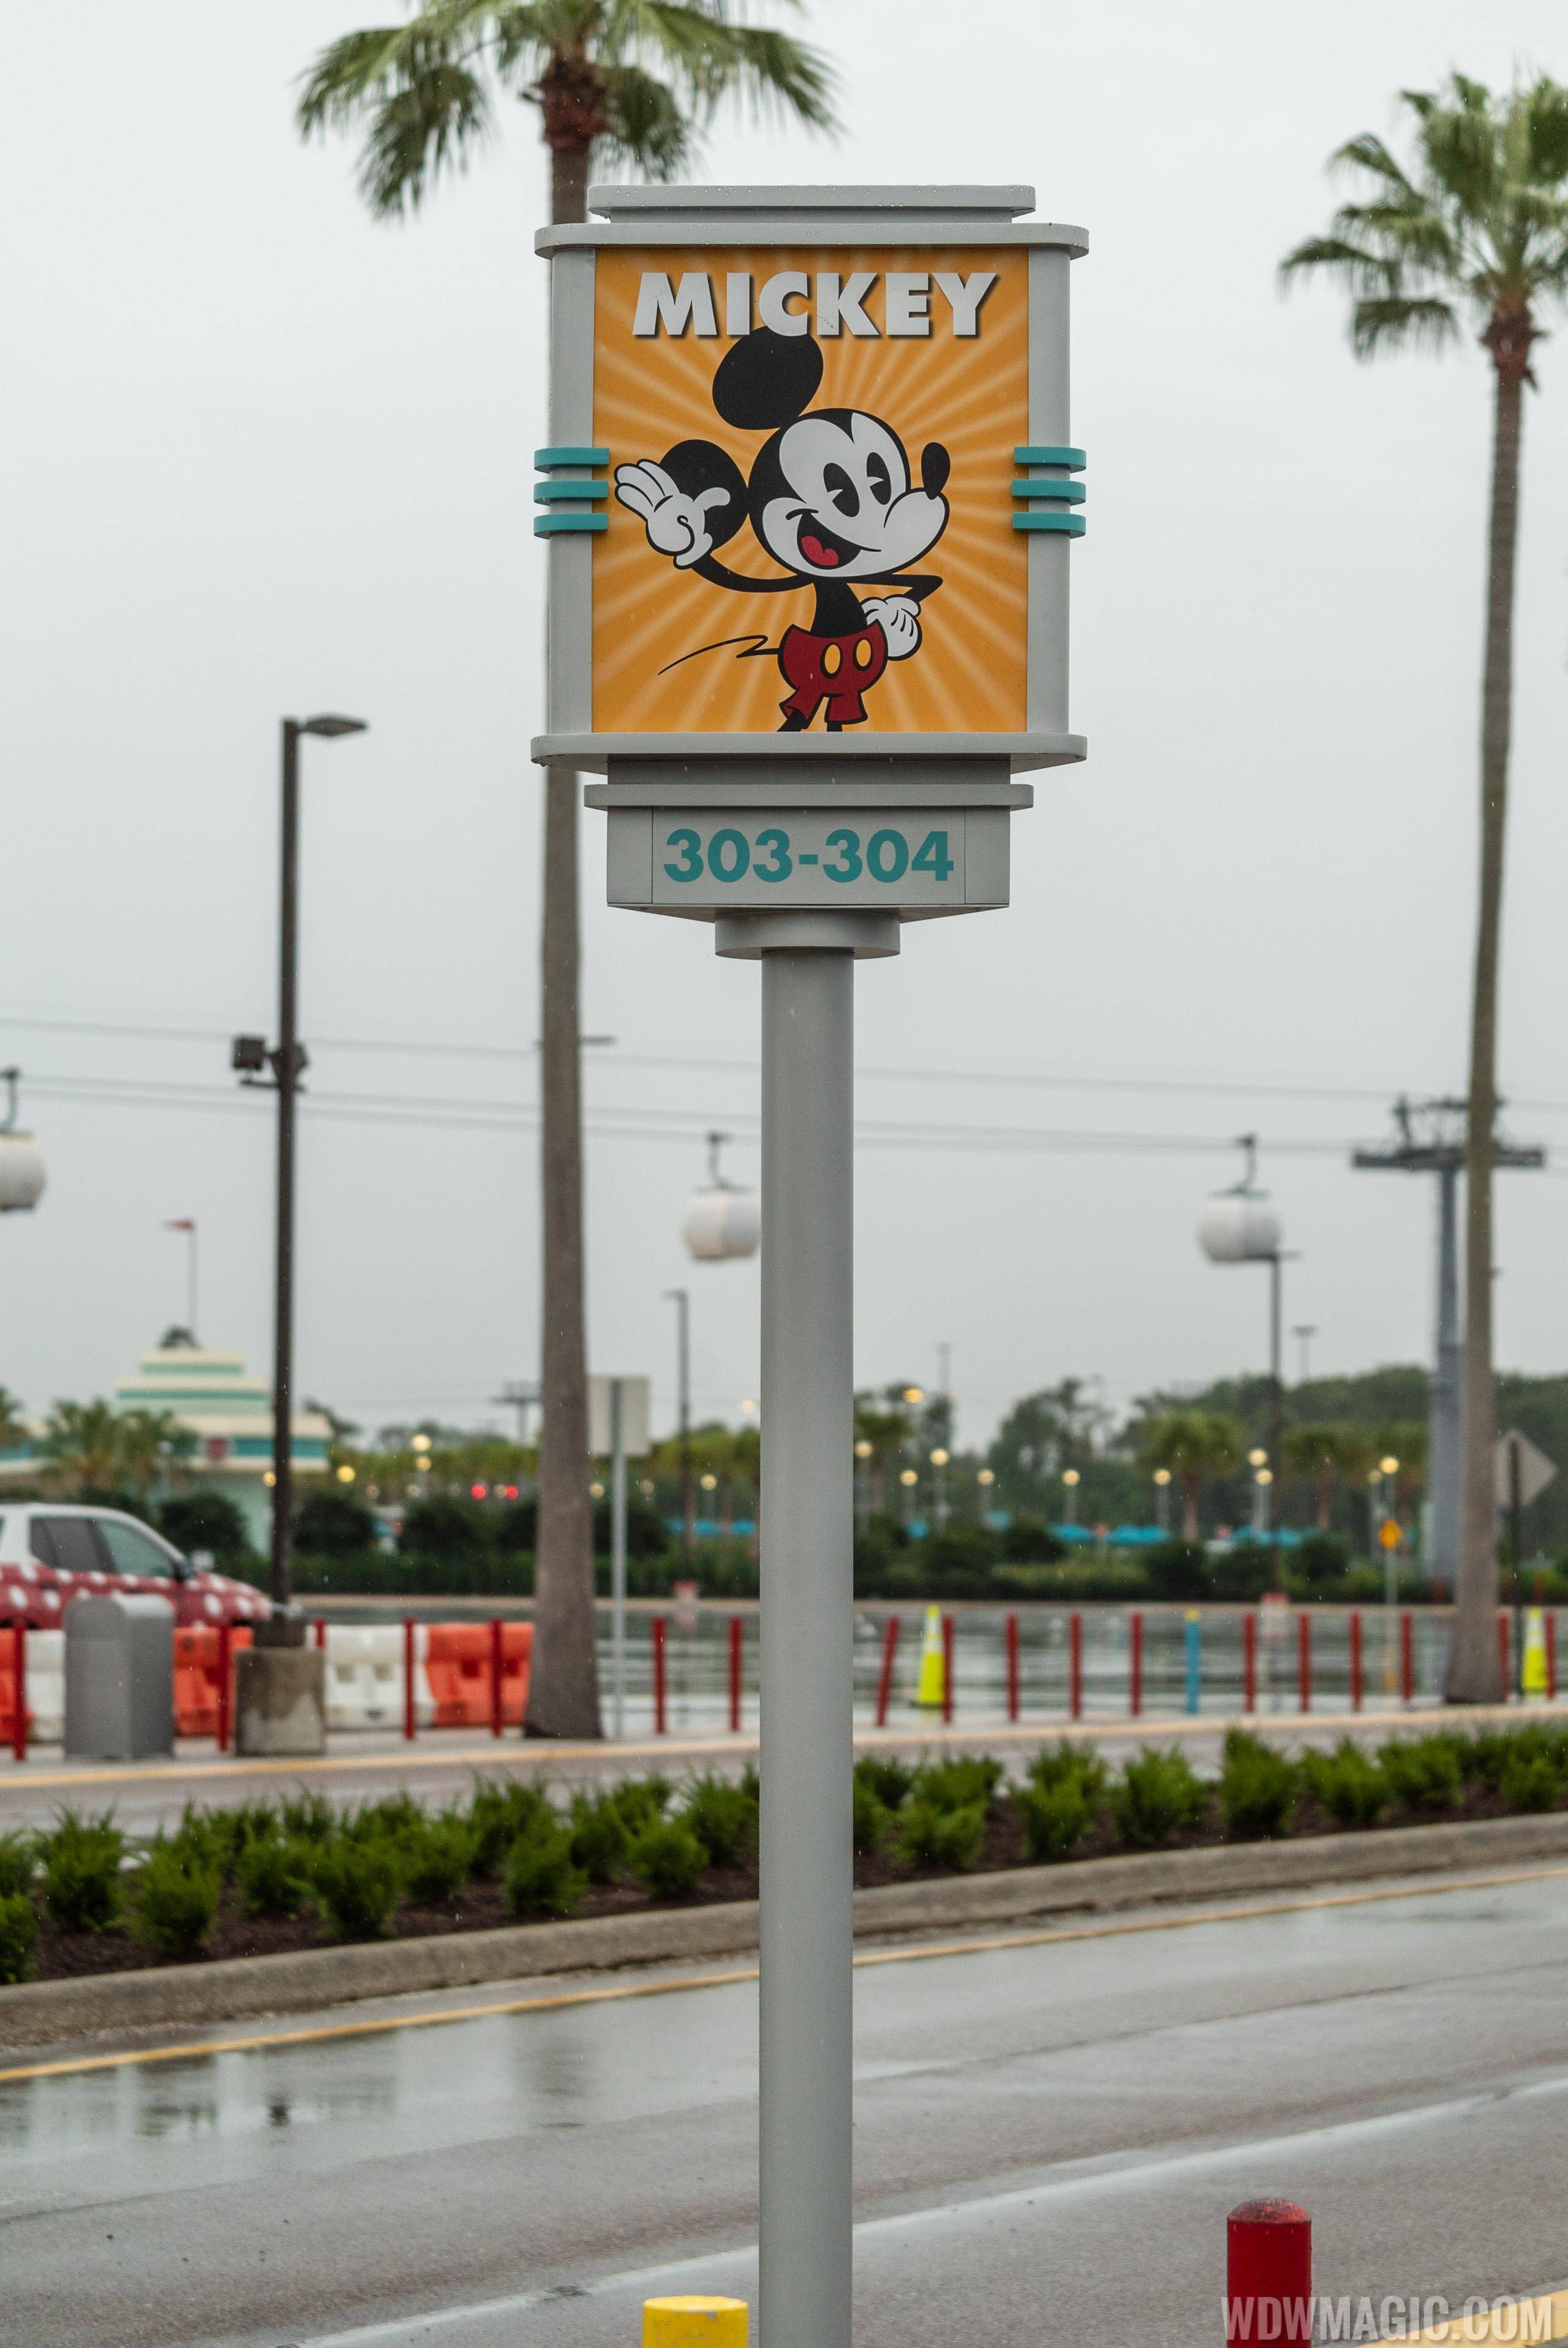 New parking lot character name signs